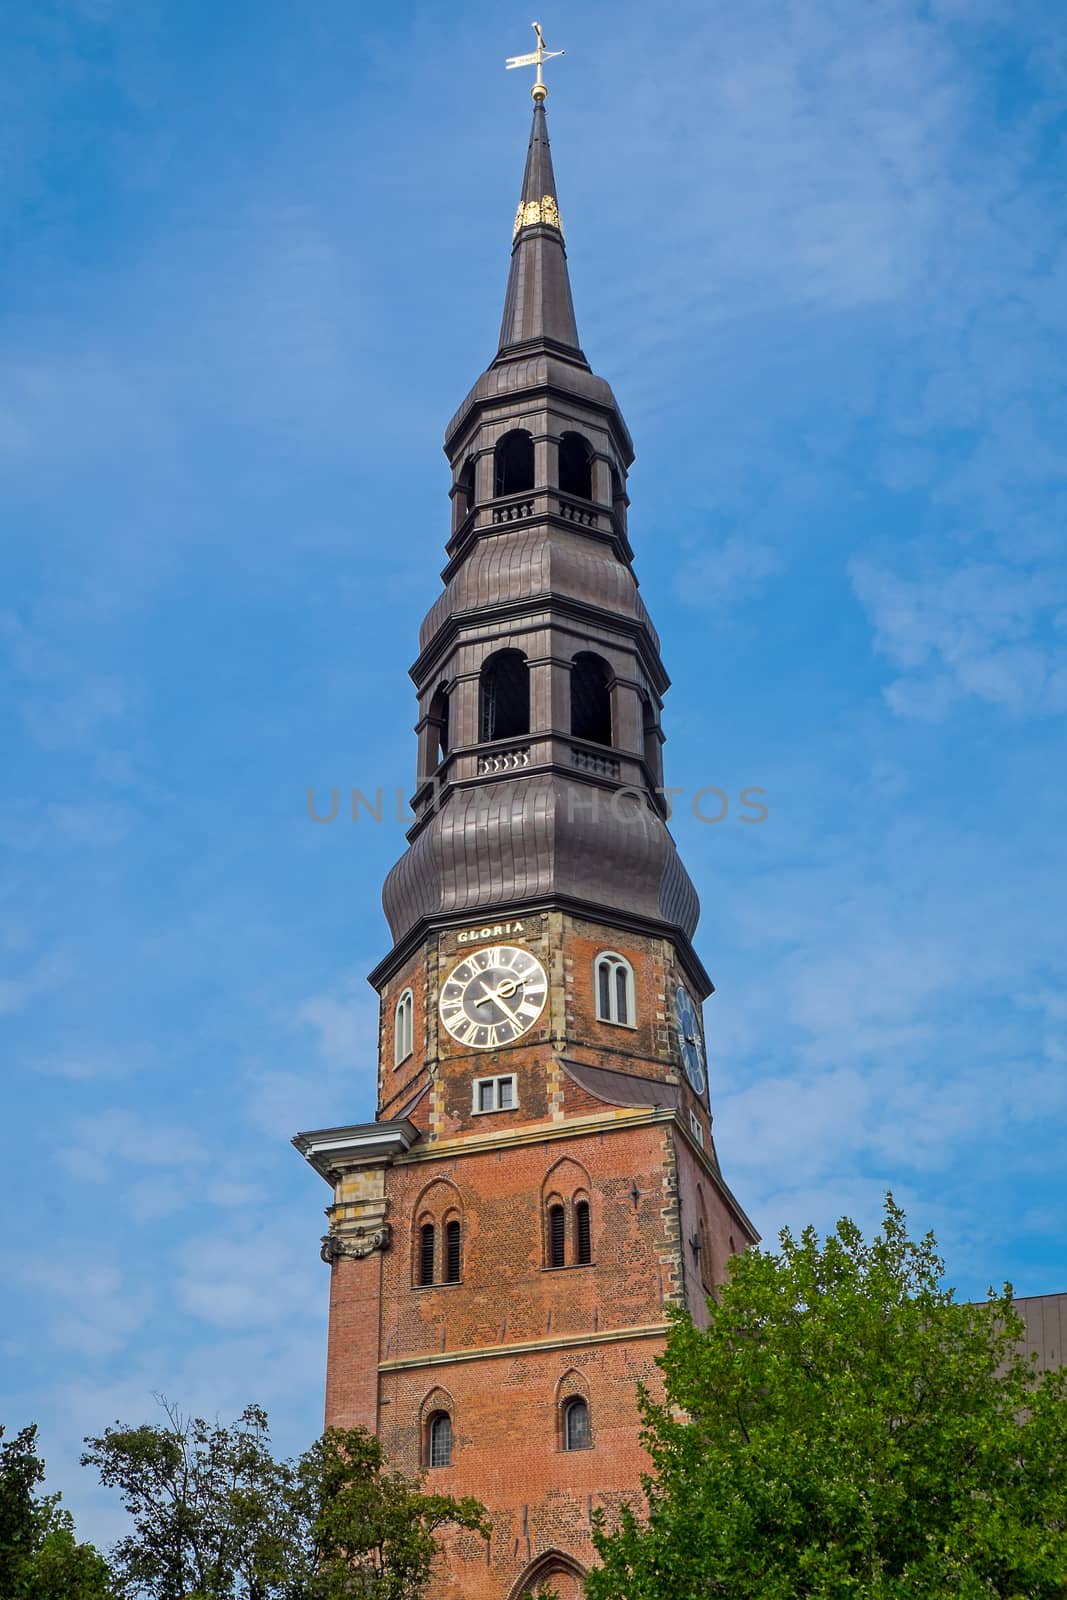 The tower of the Church of St. Catherine in Hamburg, Germany